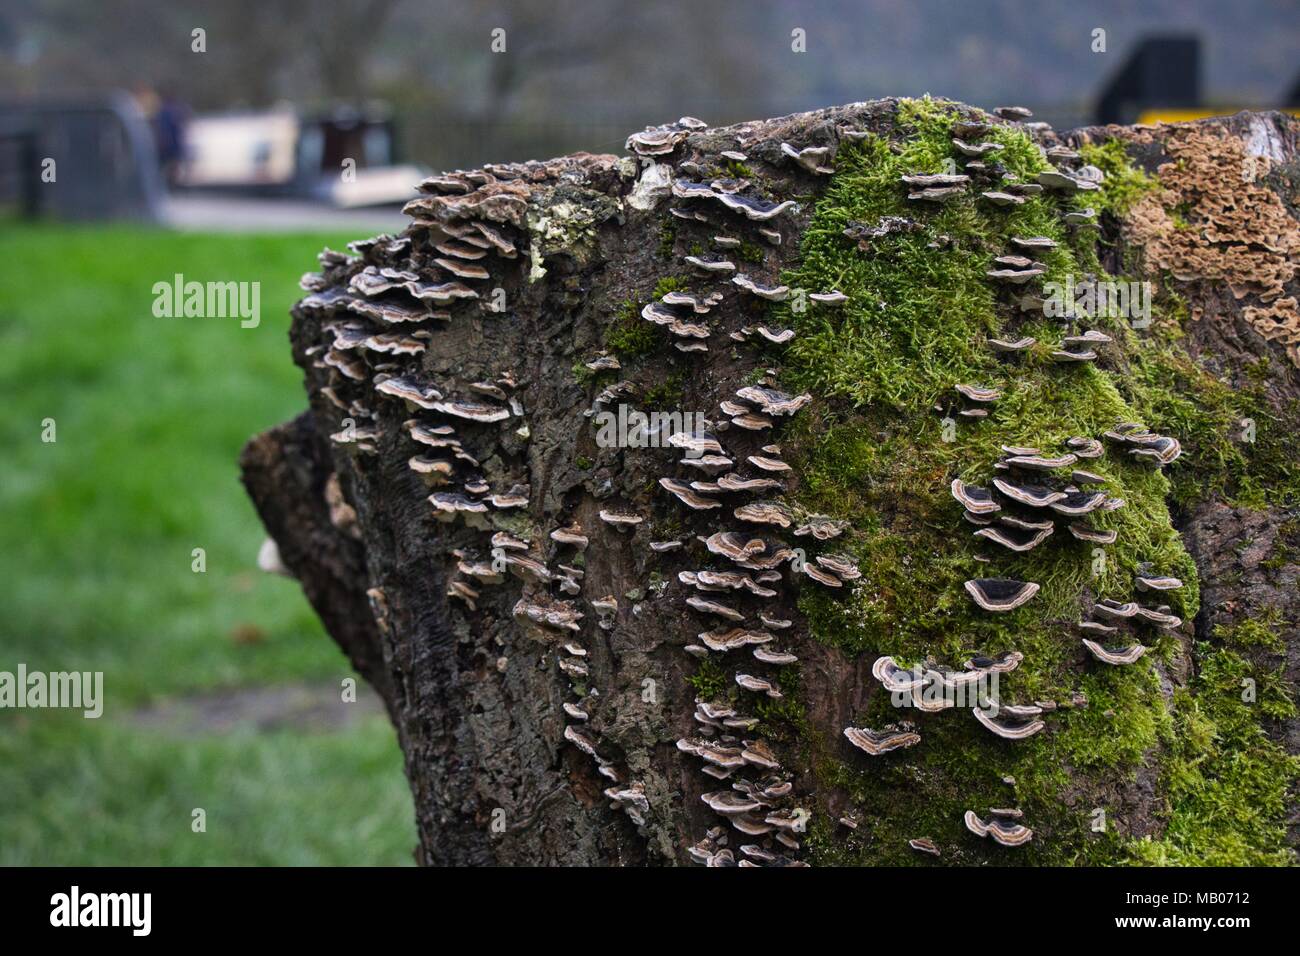 Dead tree stump with lichen, moss and  bracket fungus Stock Photo